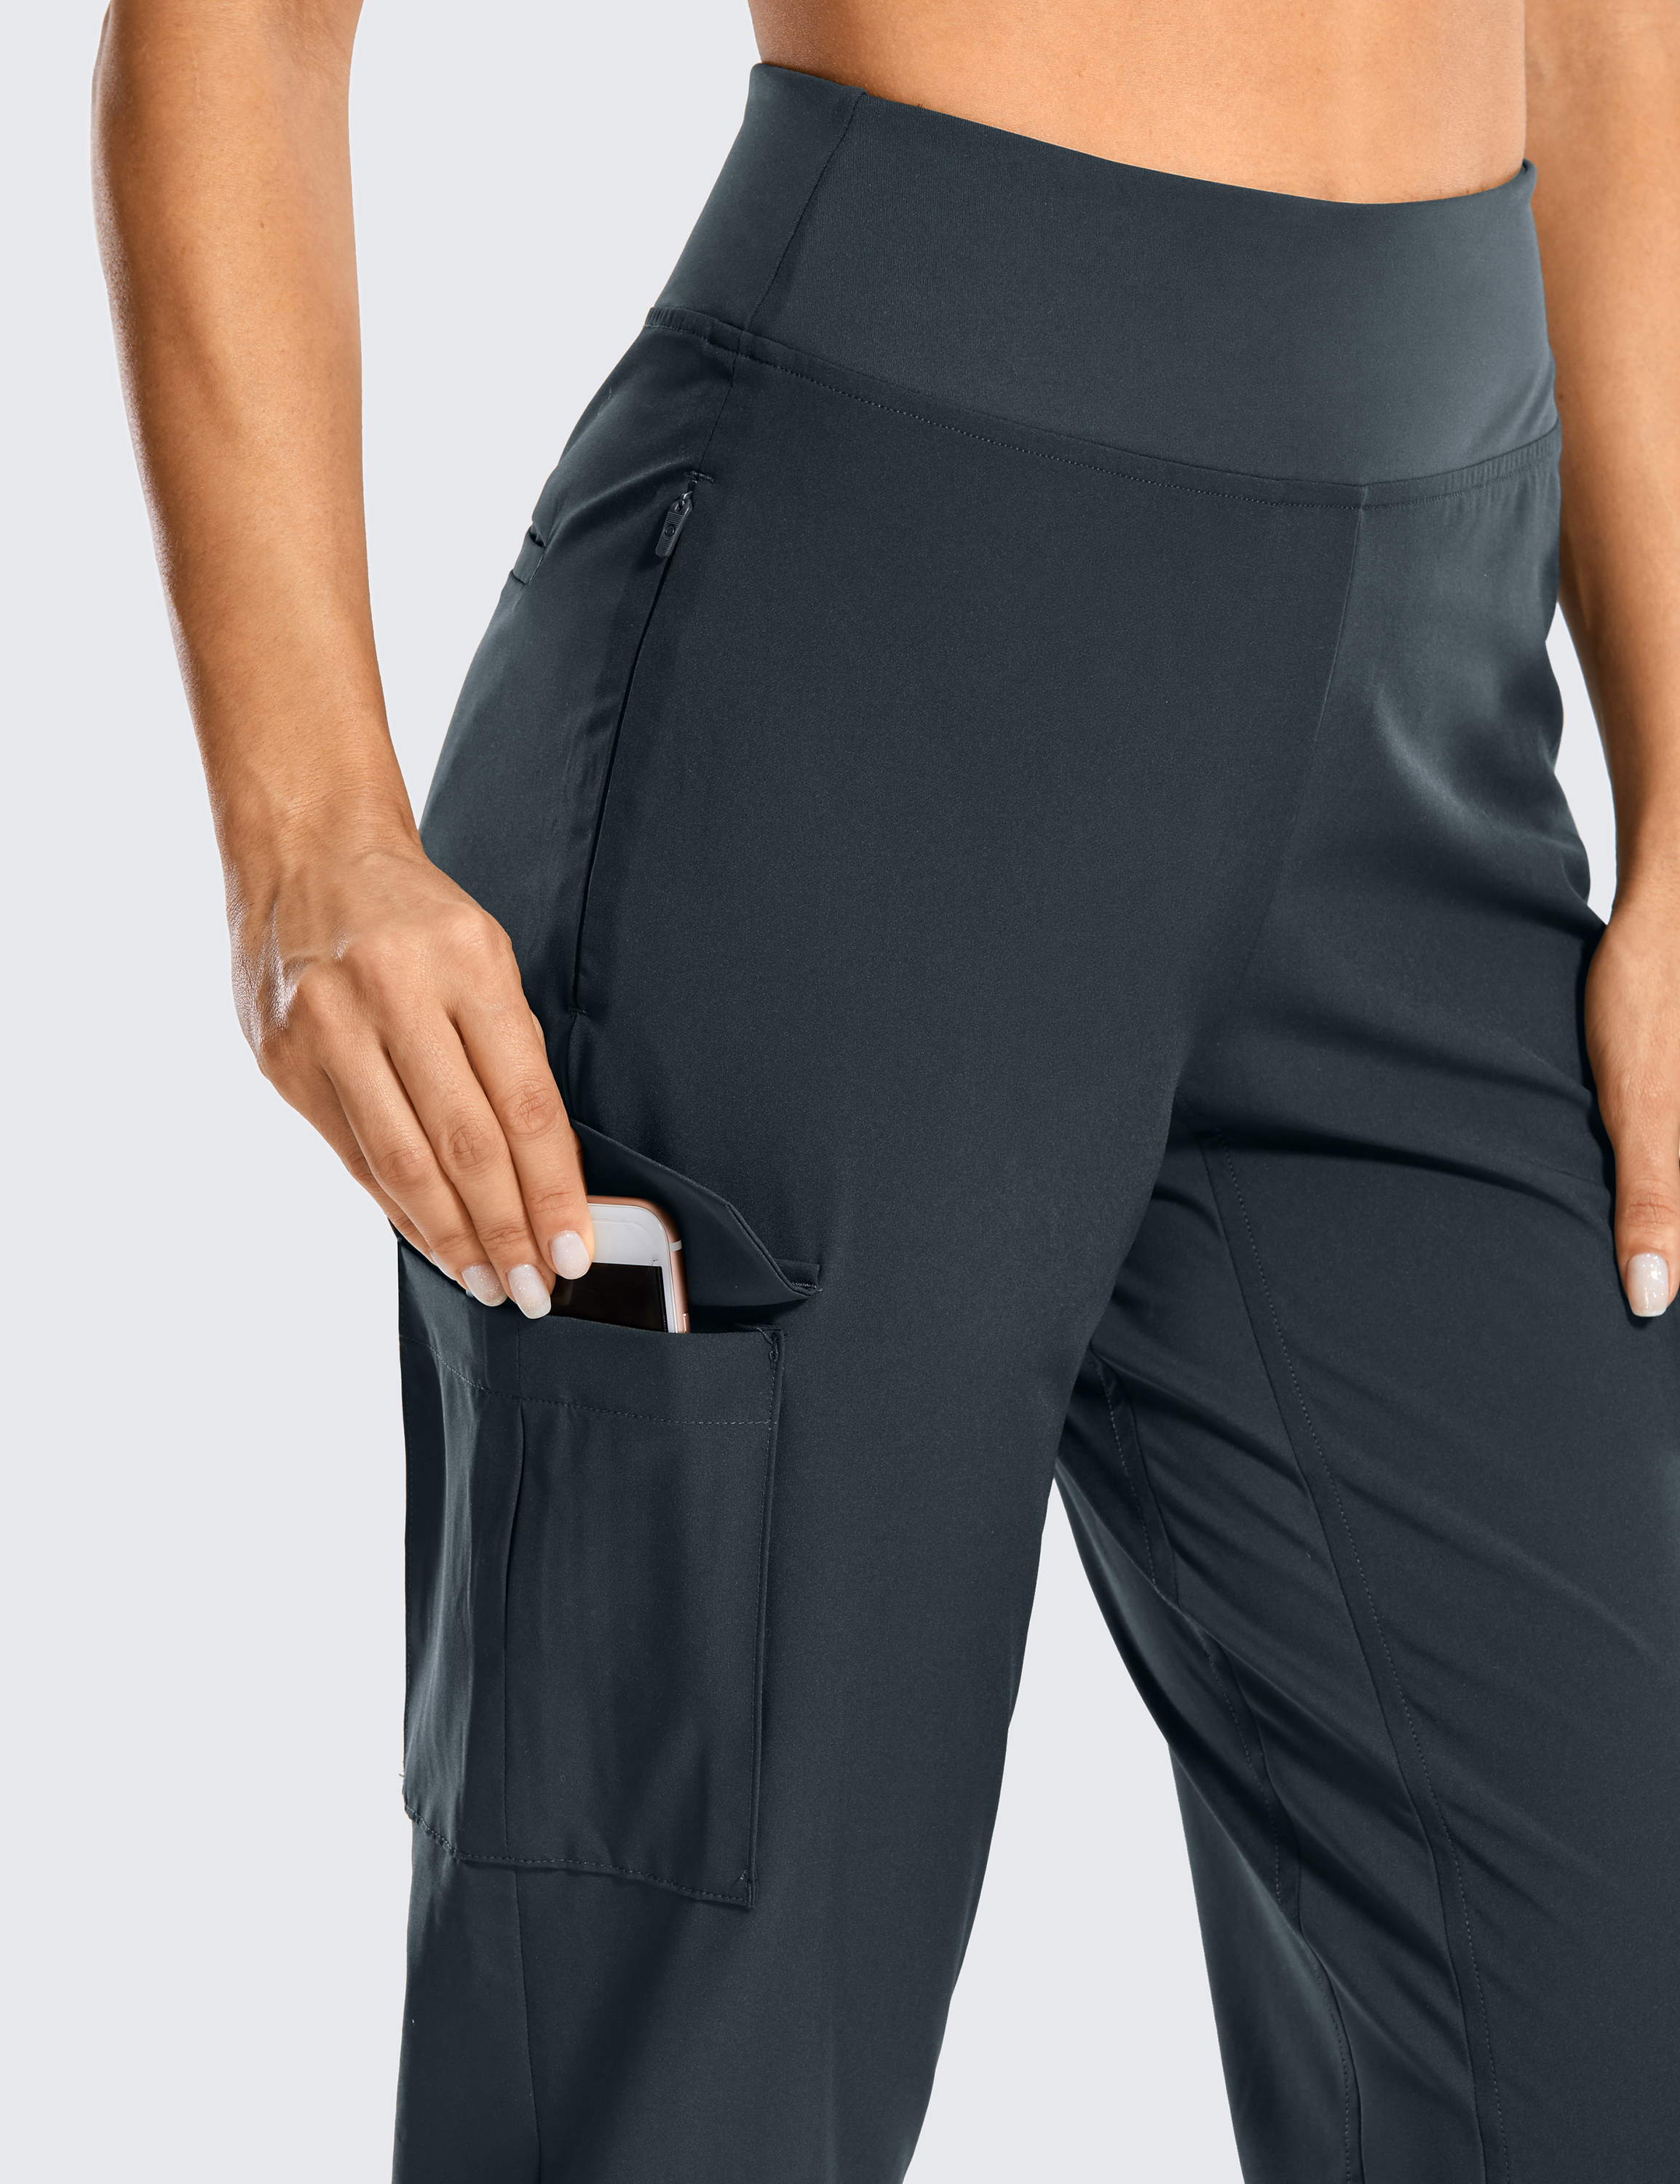 5 Day Workout pants with back pockets for Build Muscle